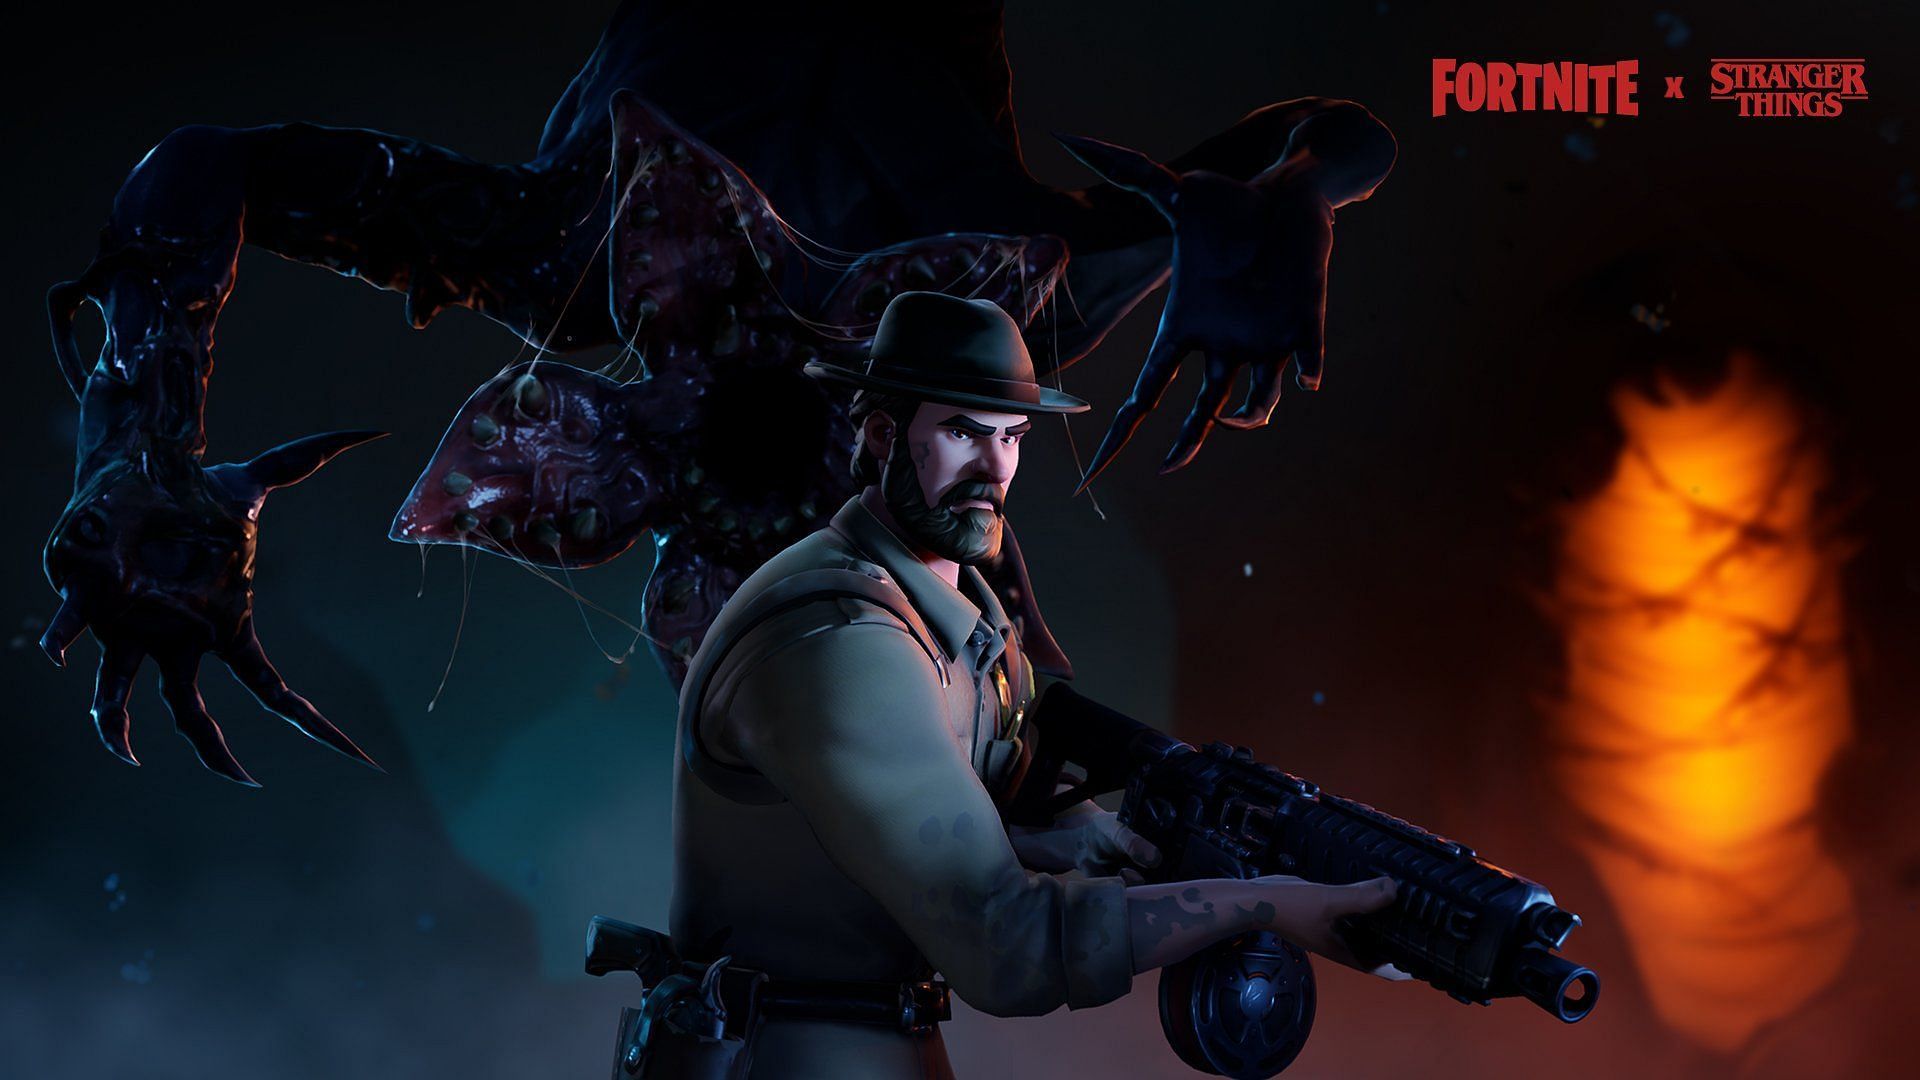 The Stranger Things collaboration might make a comeback in Fortnite when the series returns for its fourth installment (Image via Epic Games)